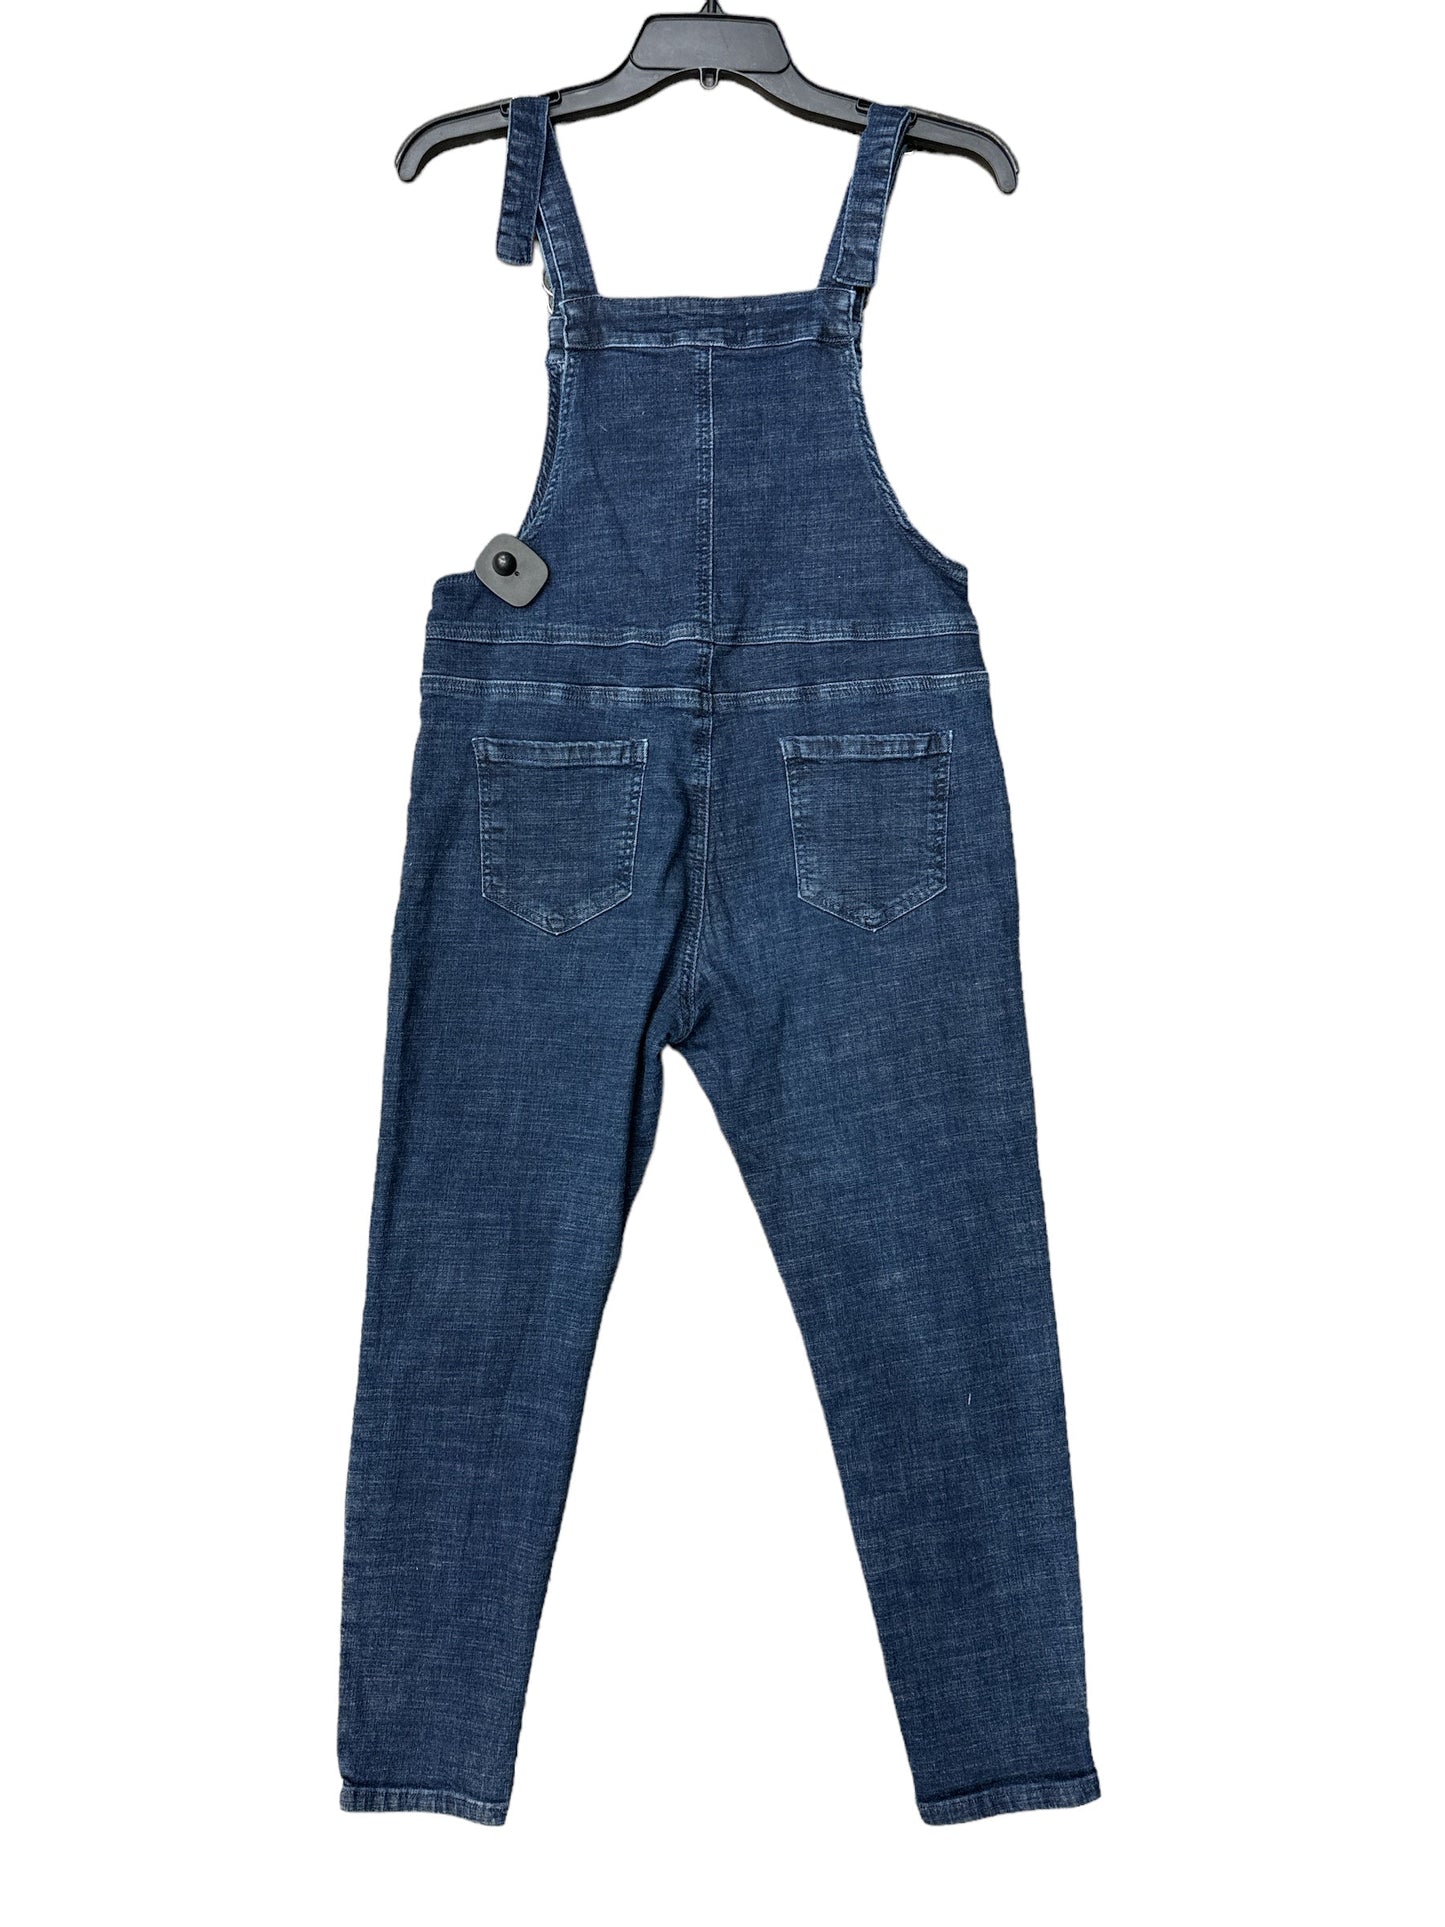 Overalls By Clothes Mentor  Size: 6